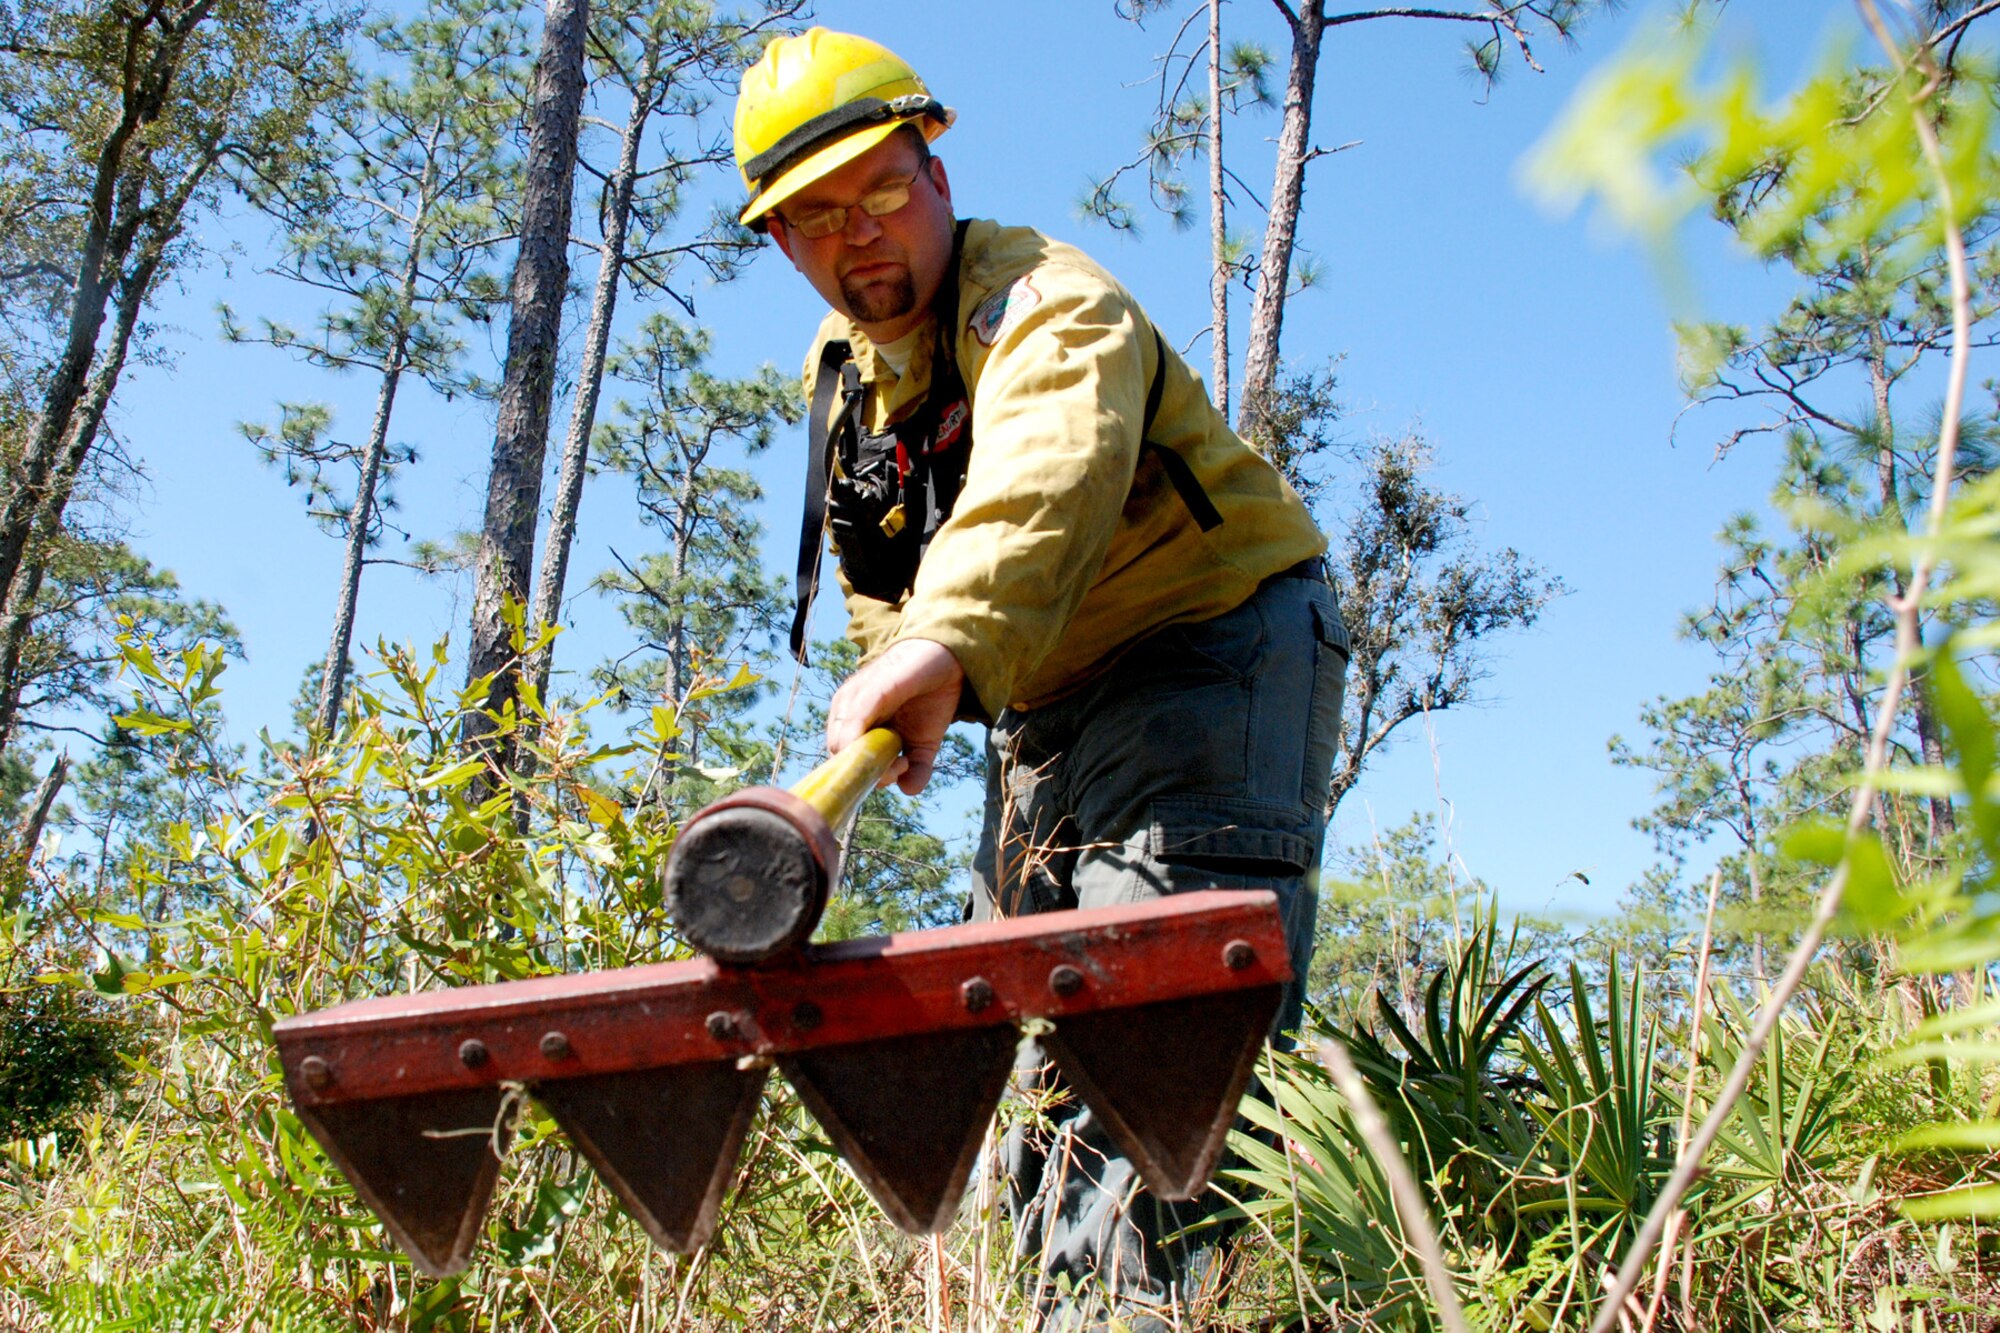 biological science technician, clears out fuel at the base of a longleaf pine tree